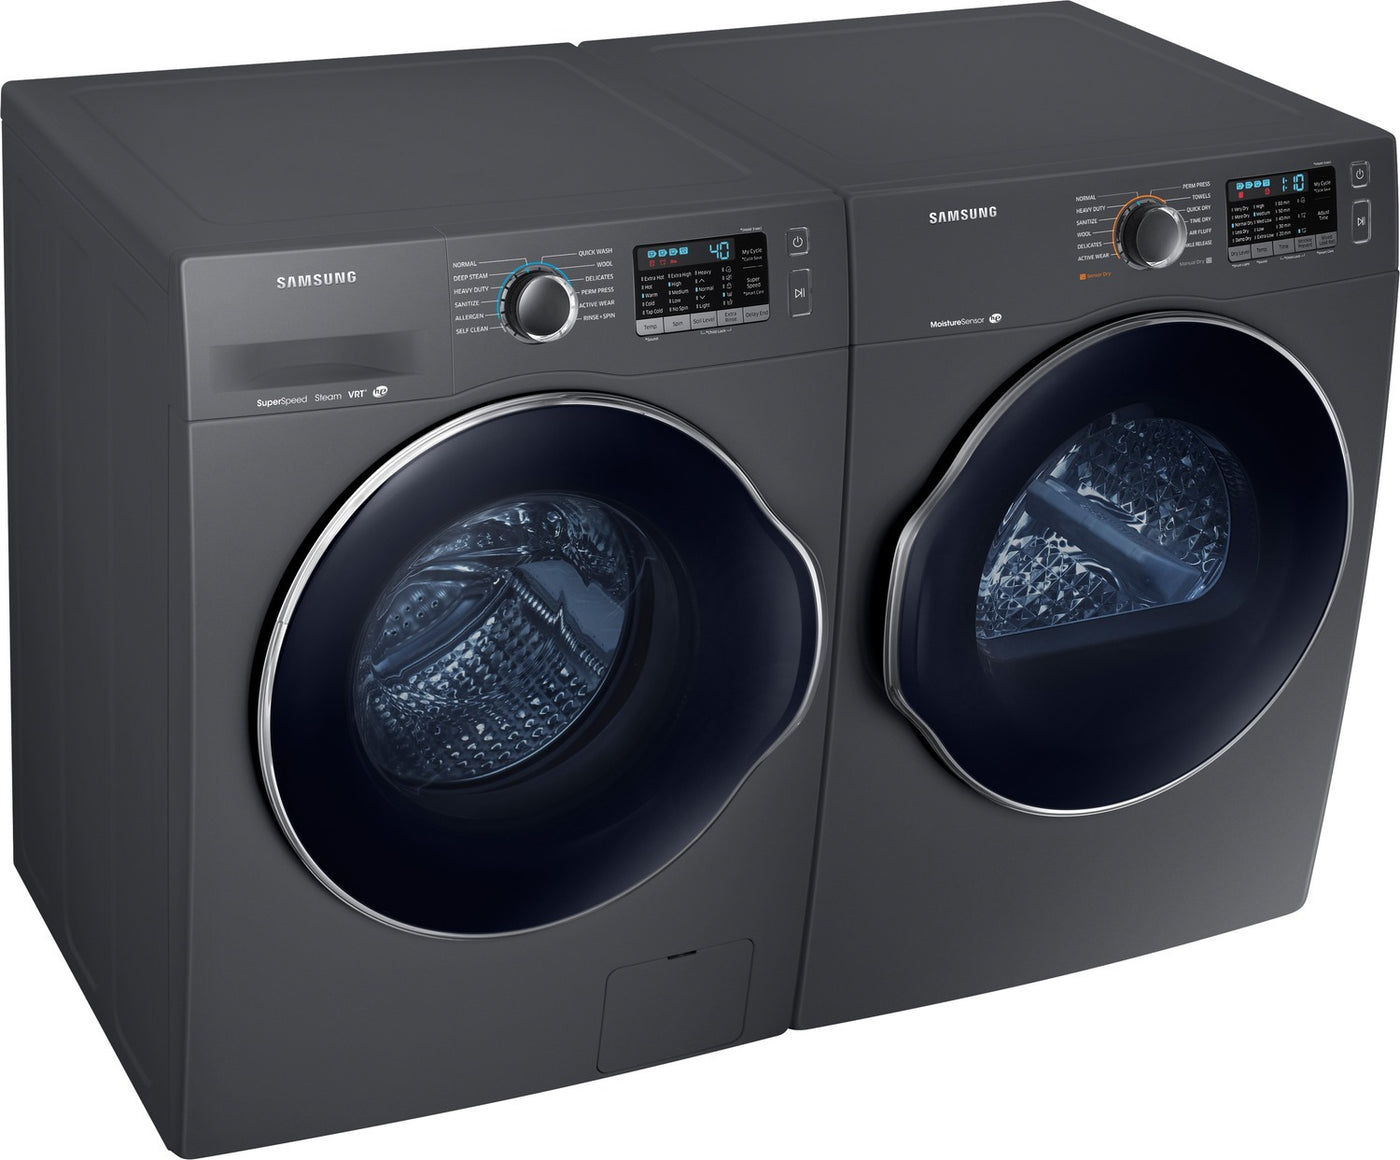 compact-front-load-washer-dryer-at-marjorie-via-blog